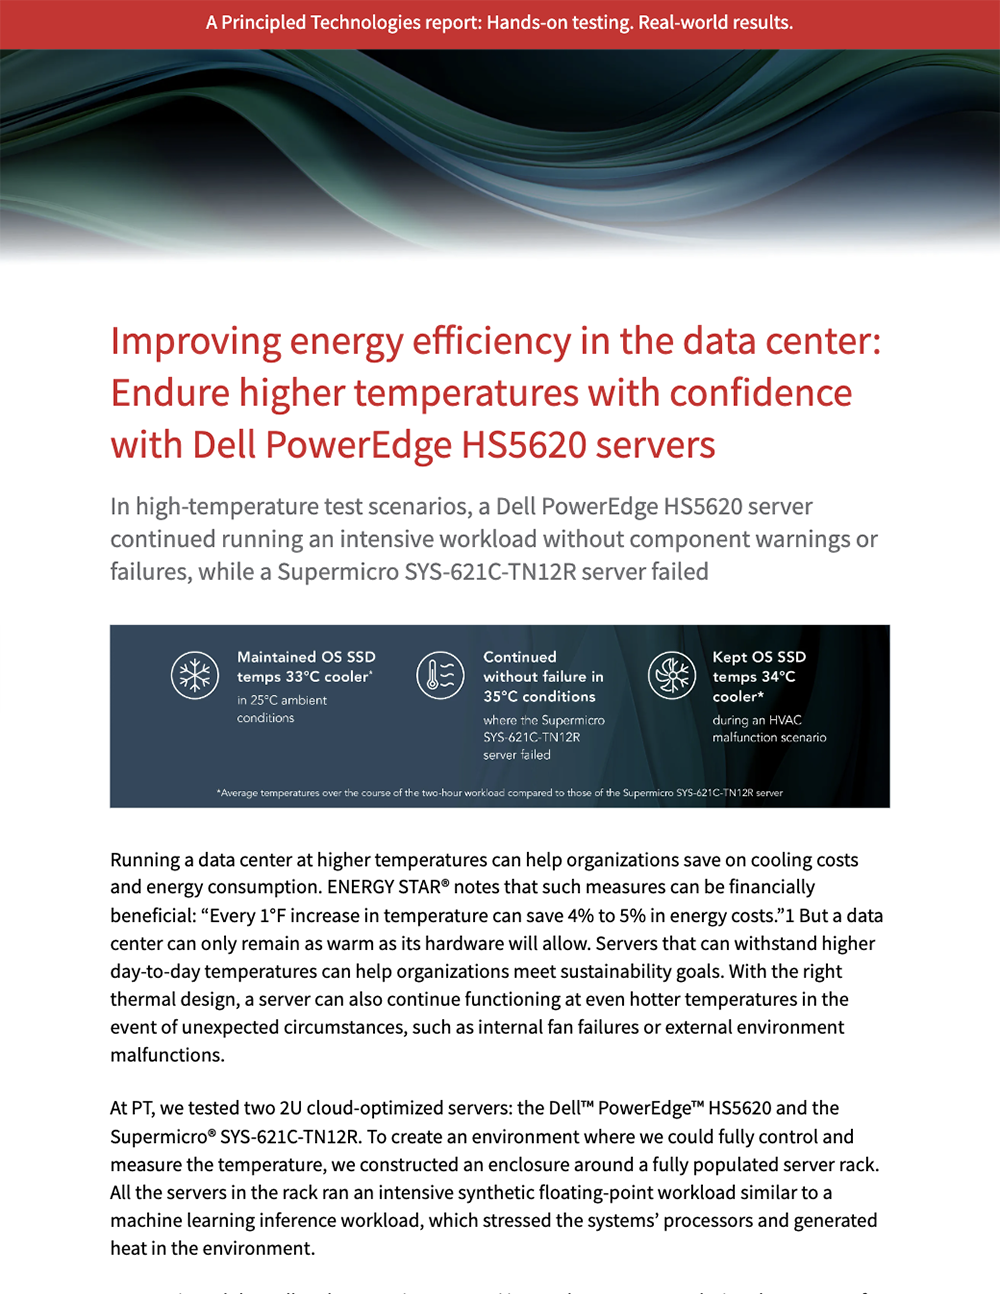 New Principled Technologies Study Evaluates the Cooling Design Advantages of the Dell PowerEdge HS5620 Compared to the Supermicro SYS-621C-TN12R